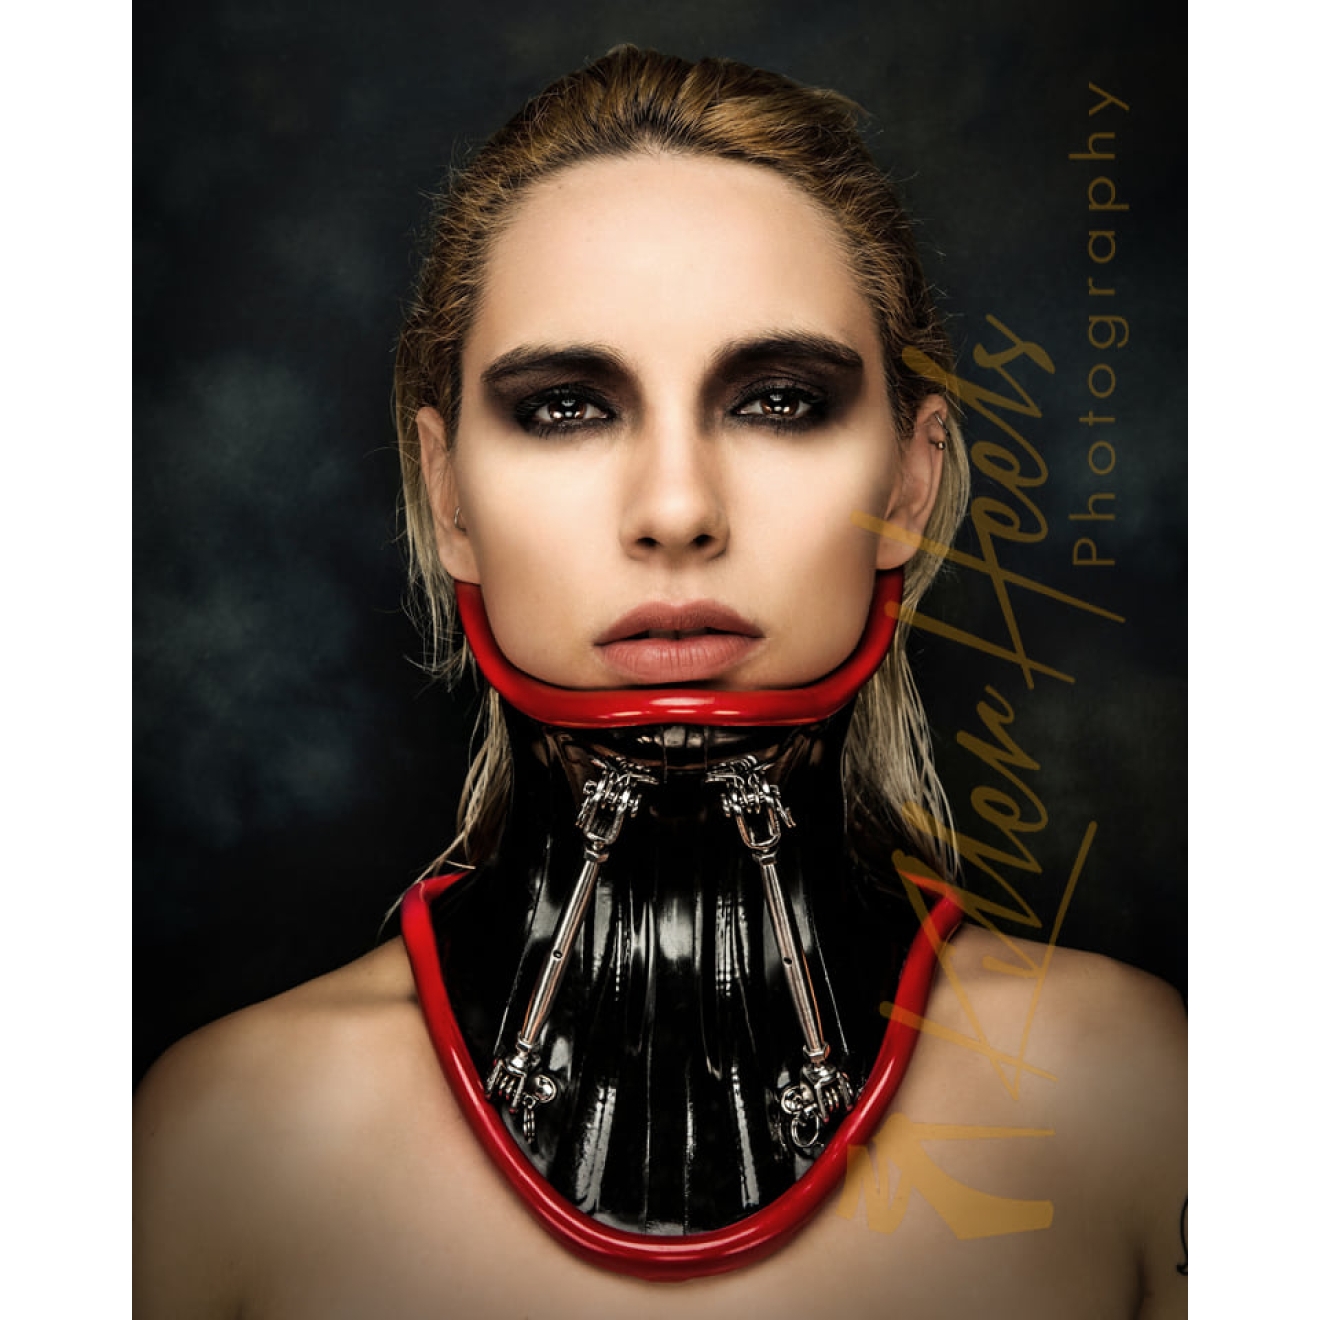 HWDnc 22 - NECK CORSET with double metal bar, HW, Fashion, Latex, Rubber,  Heavy, DVD, Design, Shop - with own production